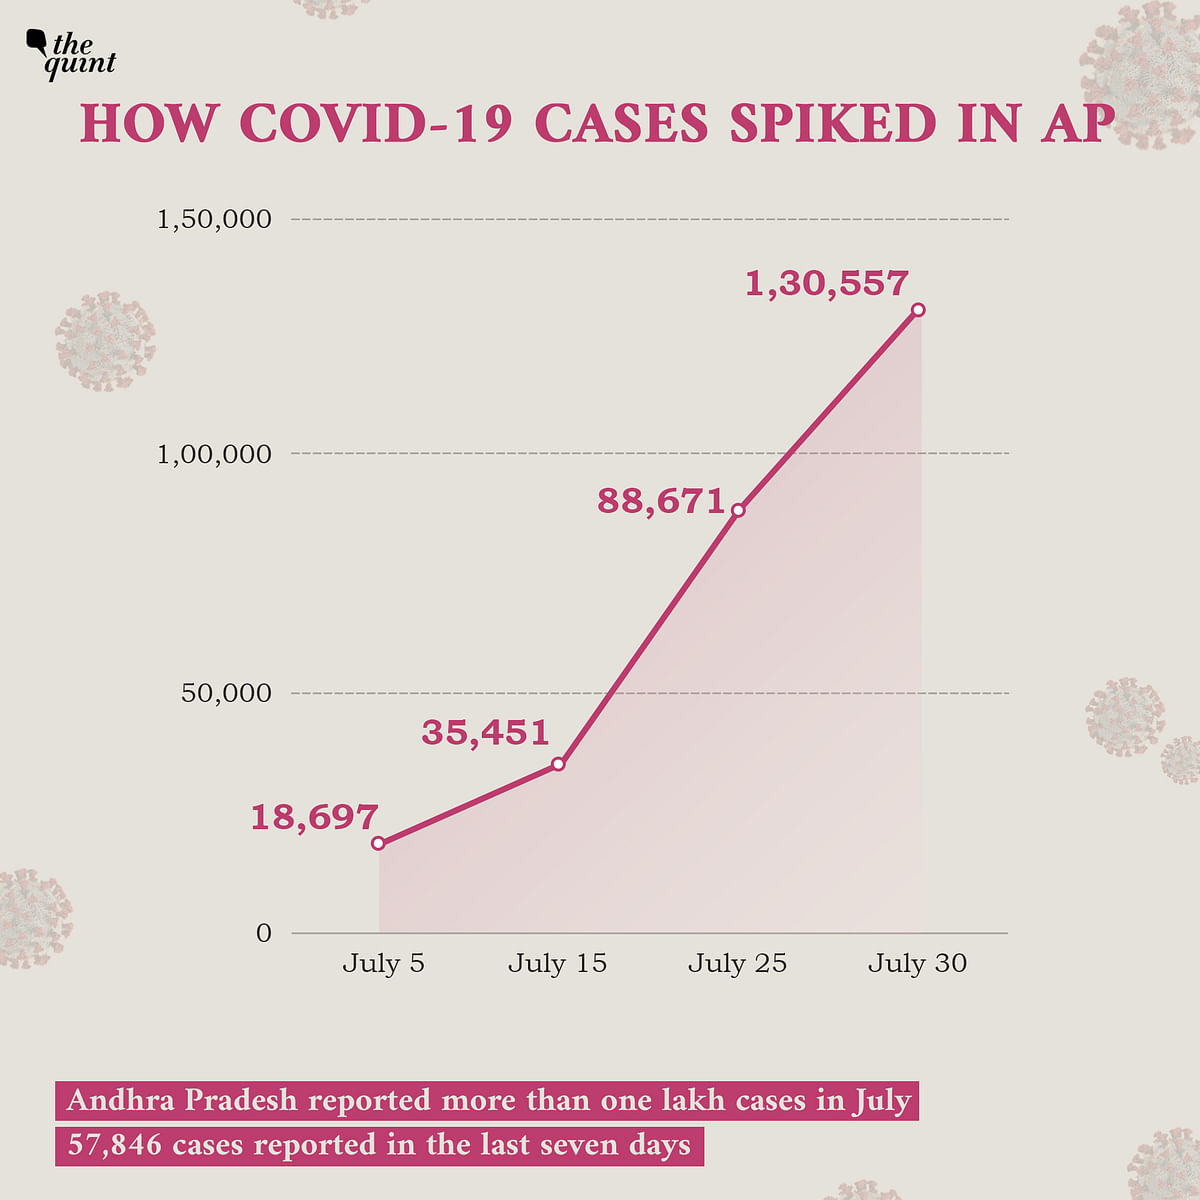 Andhra Pradesh reported more than 1 lakh COVID-19 cases in July. 